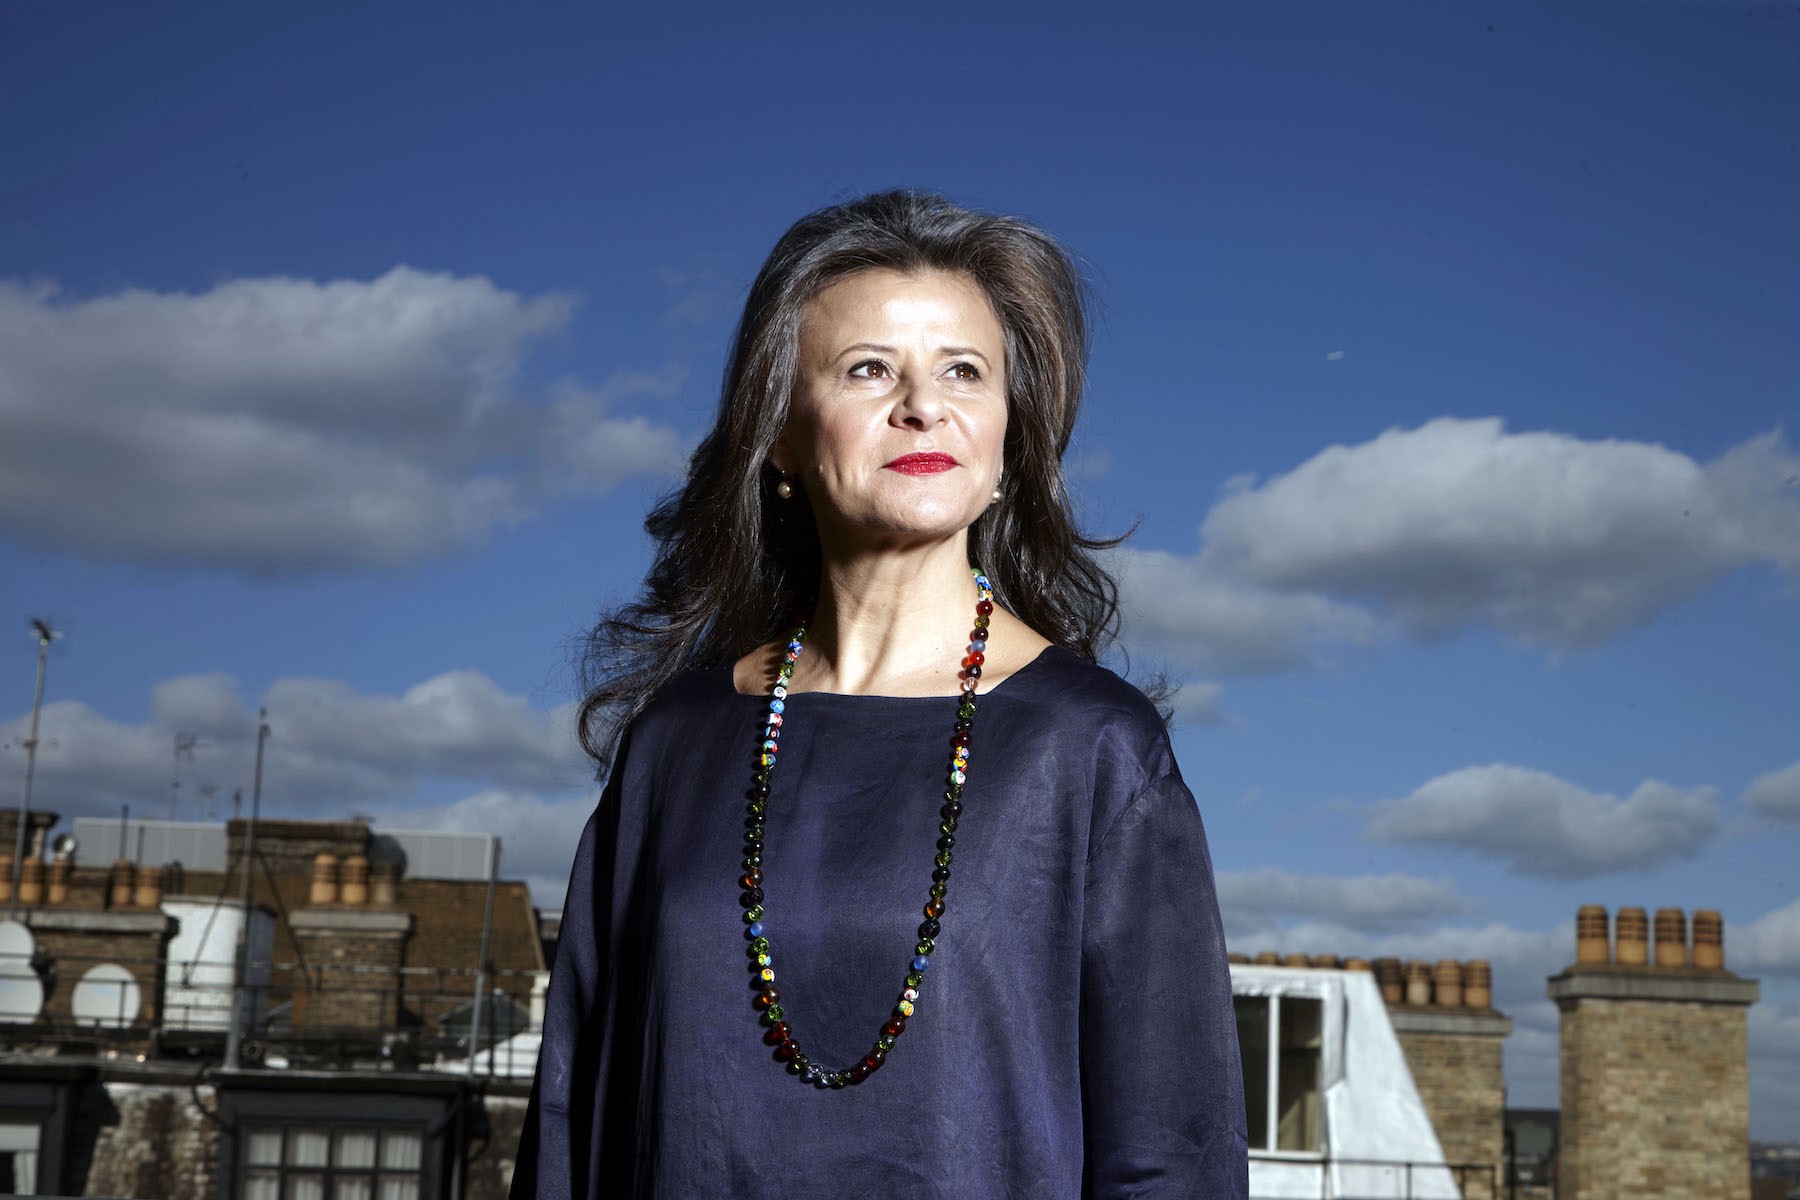 Tracey Ullman S Show Hbo Teases October Premiere Canceled Renewed Tv Shows Tv Series Finale